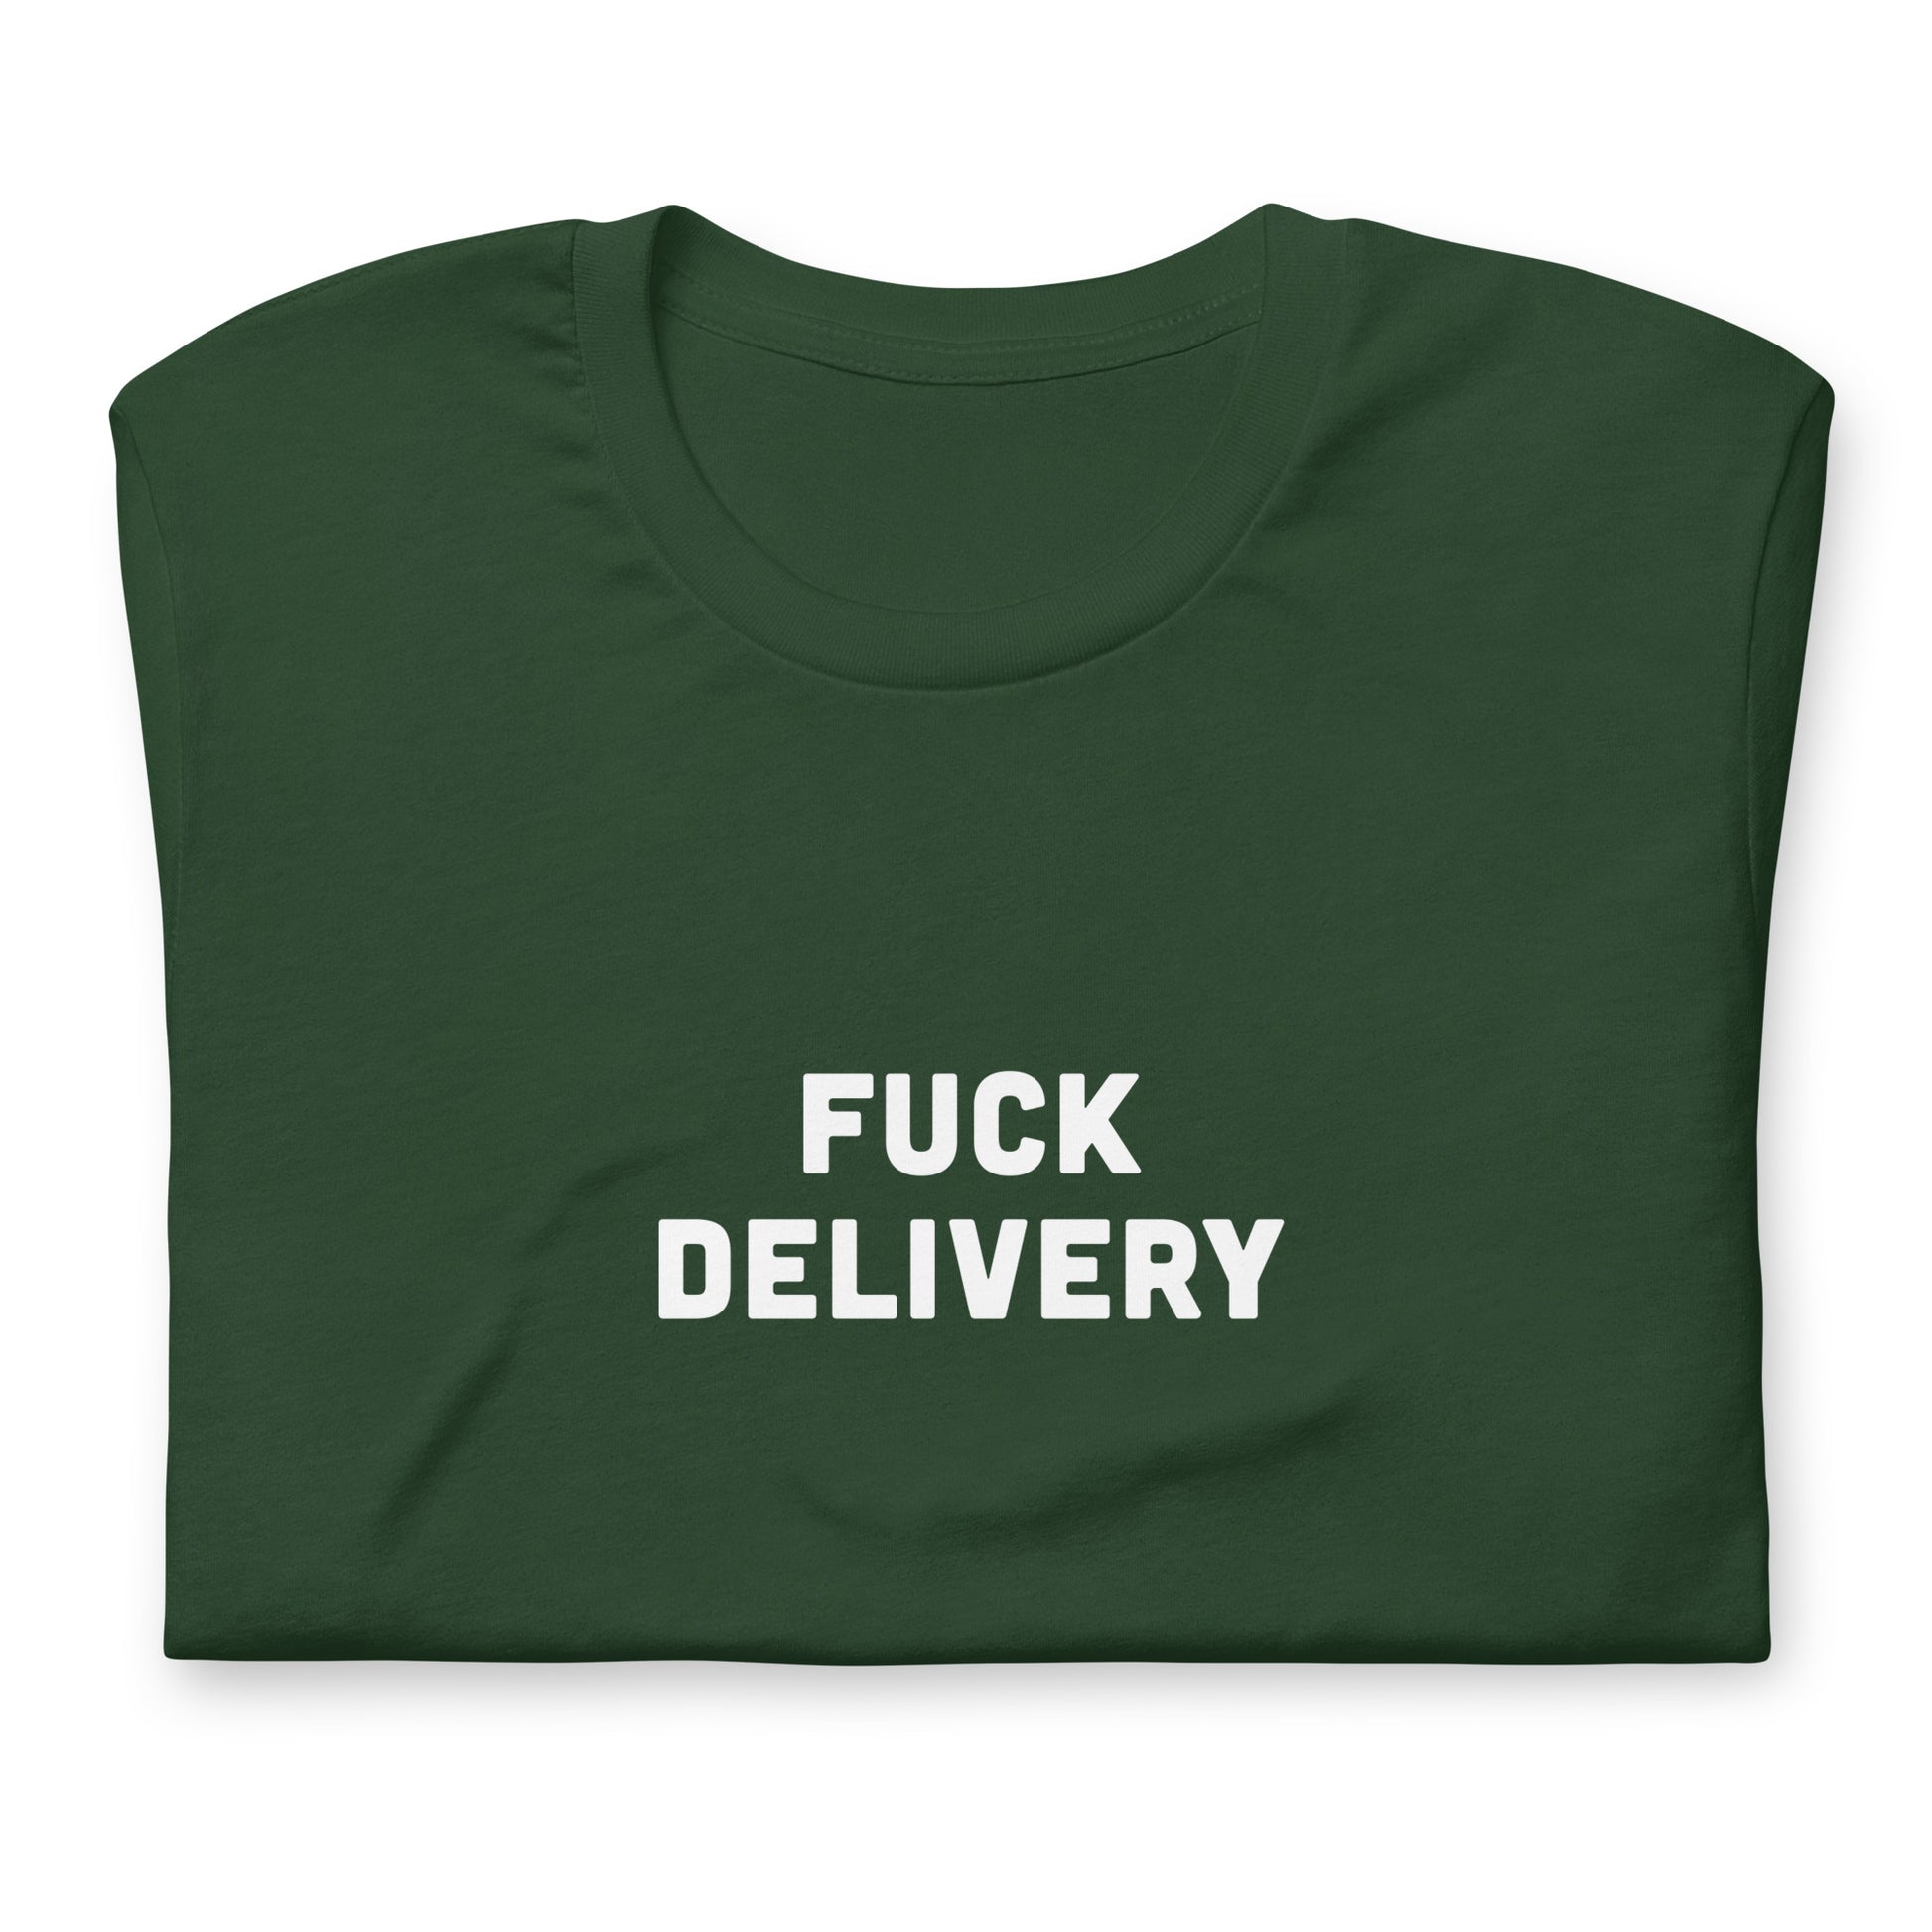 Fuck Delivery T-Shirt Size S Color Navy